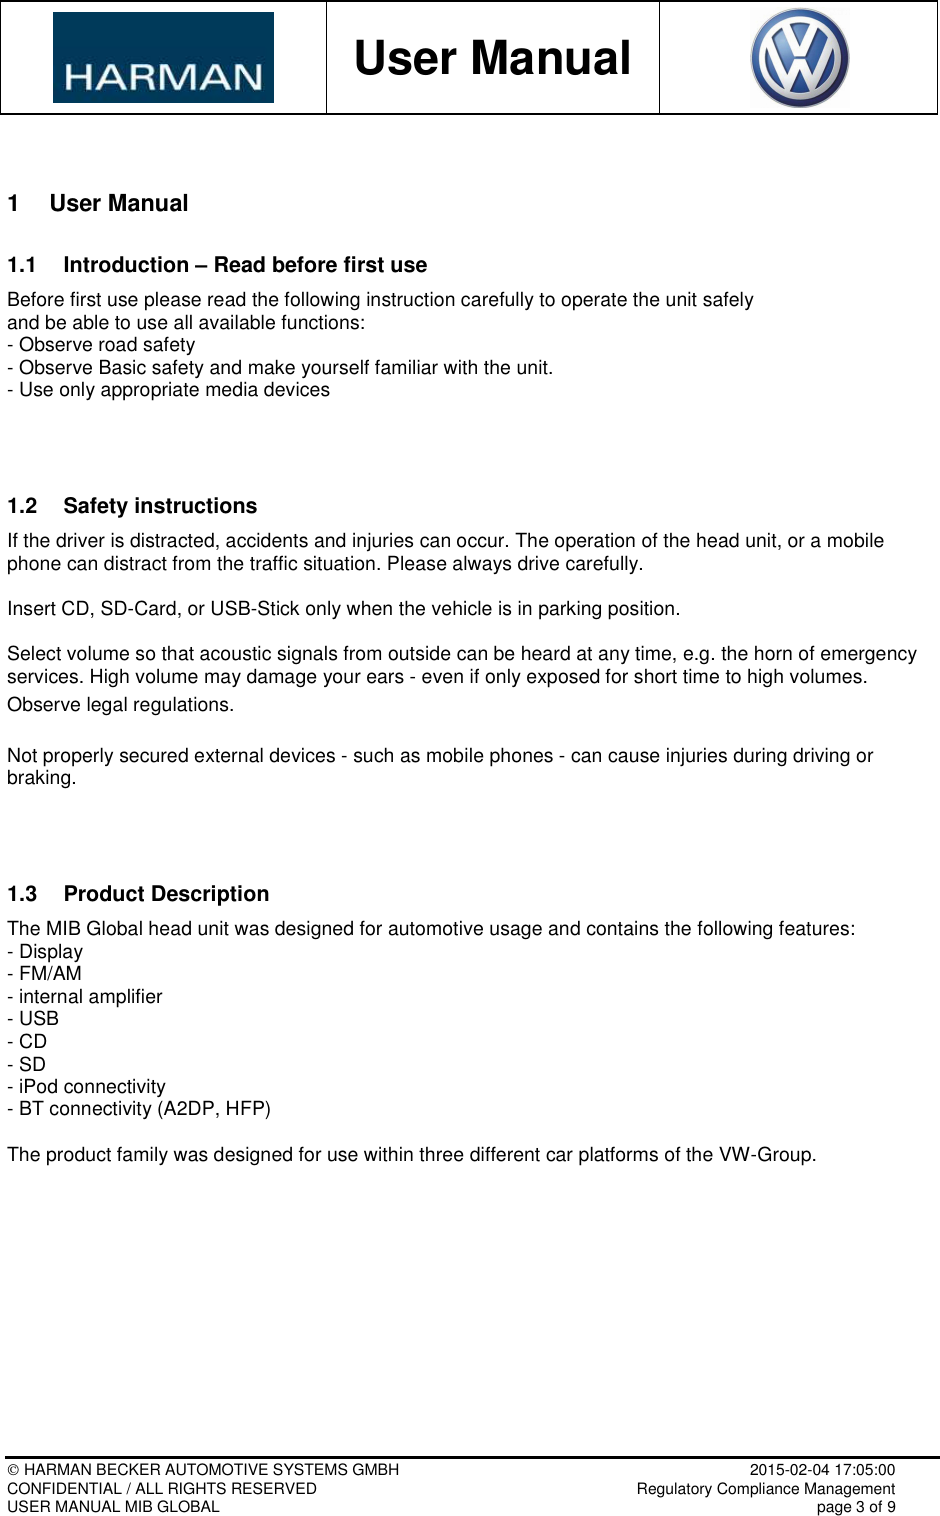           User Manual     HARMAN BECKER AUTOMOTIVE SYSTEMS GMBH    2015-02-04 17:05:00 CONFIDENTIAL / ALL RIGHTS RESERVED     Regulatory Compliance Management USER MANUAL MIB GLOBAL    page 3 of 9  1  User Manual 1.1  Introduction – Read before first use Before first use please read the following instruction carefully to operate the unit safely  and be able to use all available functions: - Observe road safety - Observe Basic safety and make yourself familiar with the unit. - Use only appropriate media devices   1.2  Safety instructions If the driver is distracted, accidents and injuries can occur. The operation of the head unit, or a mobile phone can distract from the traffic situation. Please always drive carefully.  Insert CD, SD-Card, or USB-Stick only when the vehicle is in parking position.  Select volume so that acoustic signals from outside can be heard at any time, e.g. the horn of emergency services. High volume may damage your ears - even if only exposed for short time to high volumes. Observe legal regulations.  Not properly secured external devices - such as mobile phones - can cause injuries during driving or braking.   1.3  Product Description  The MIB Global head unit was designed for automotive usage and contains the following features:  - Display - FM/AM - internal amplifier - USB - CD - SD - iPod connectivity - BT connectivity (A2DP, HFP)  The product family was designed for use within three different car platforms of the VW-Group.          